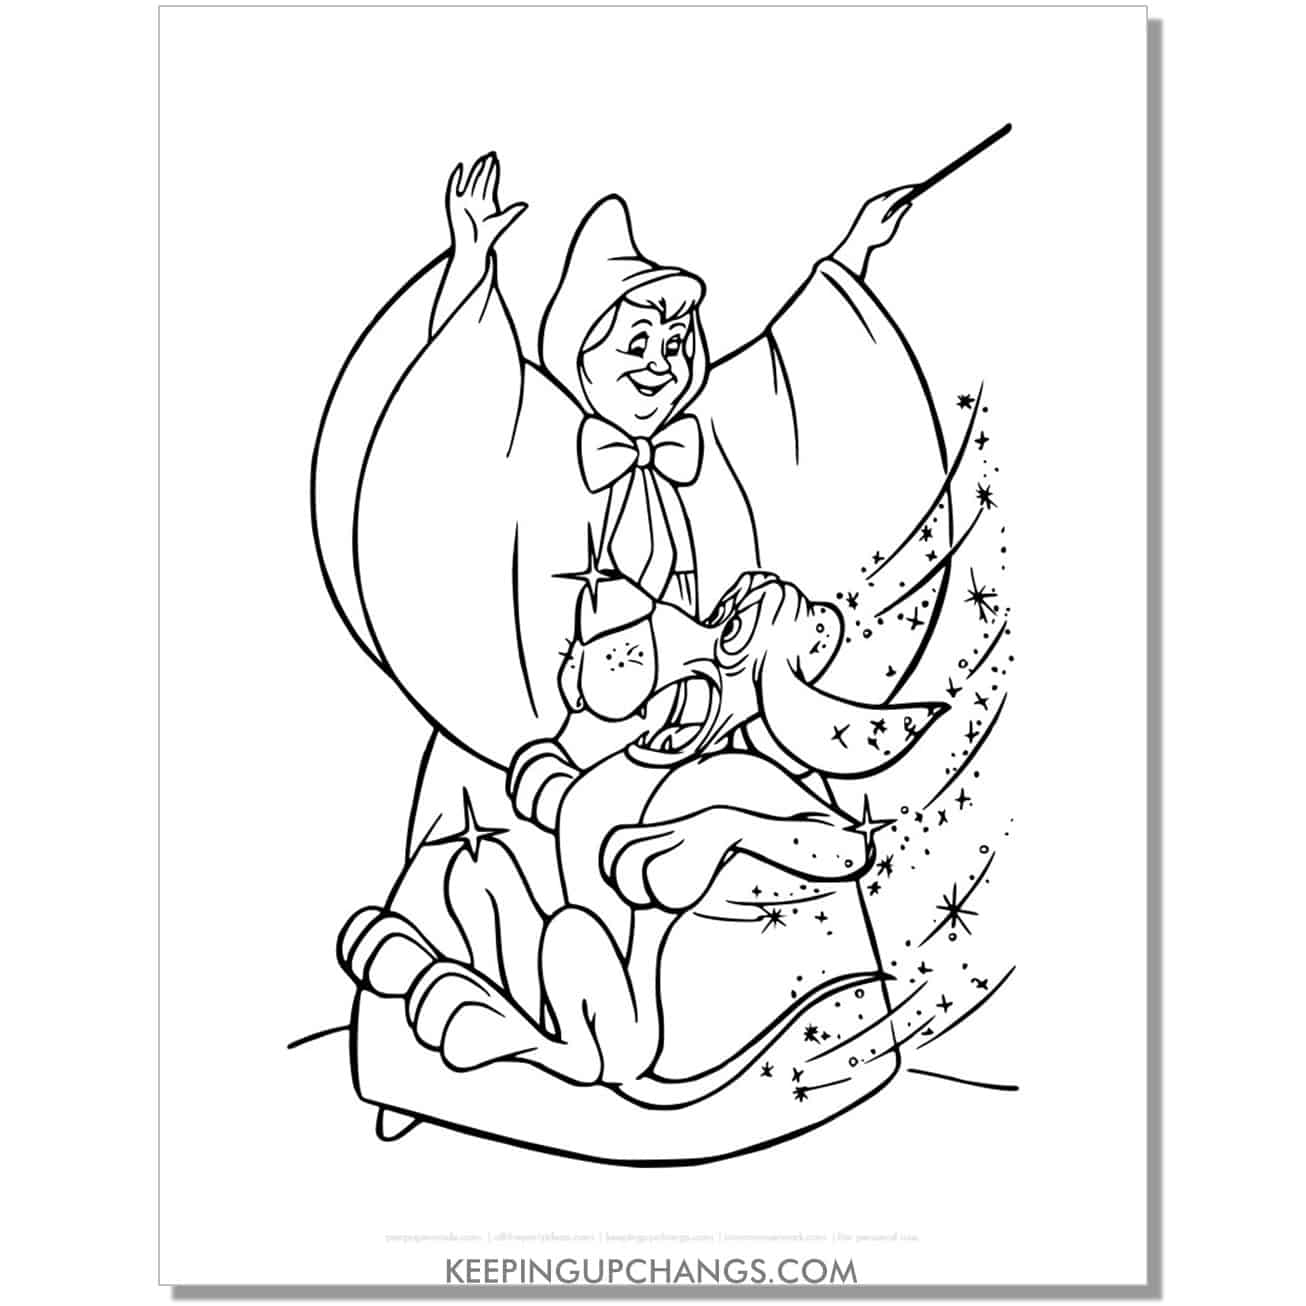 cinderella's fairy godmother turns bloodhound bruno to footman coloring page, sheet.